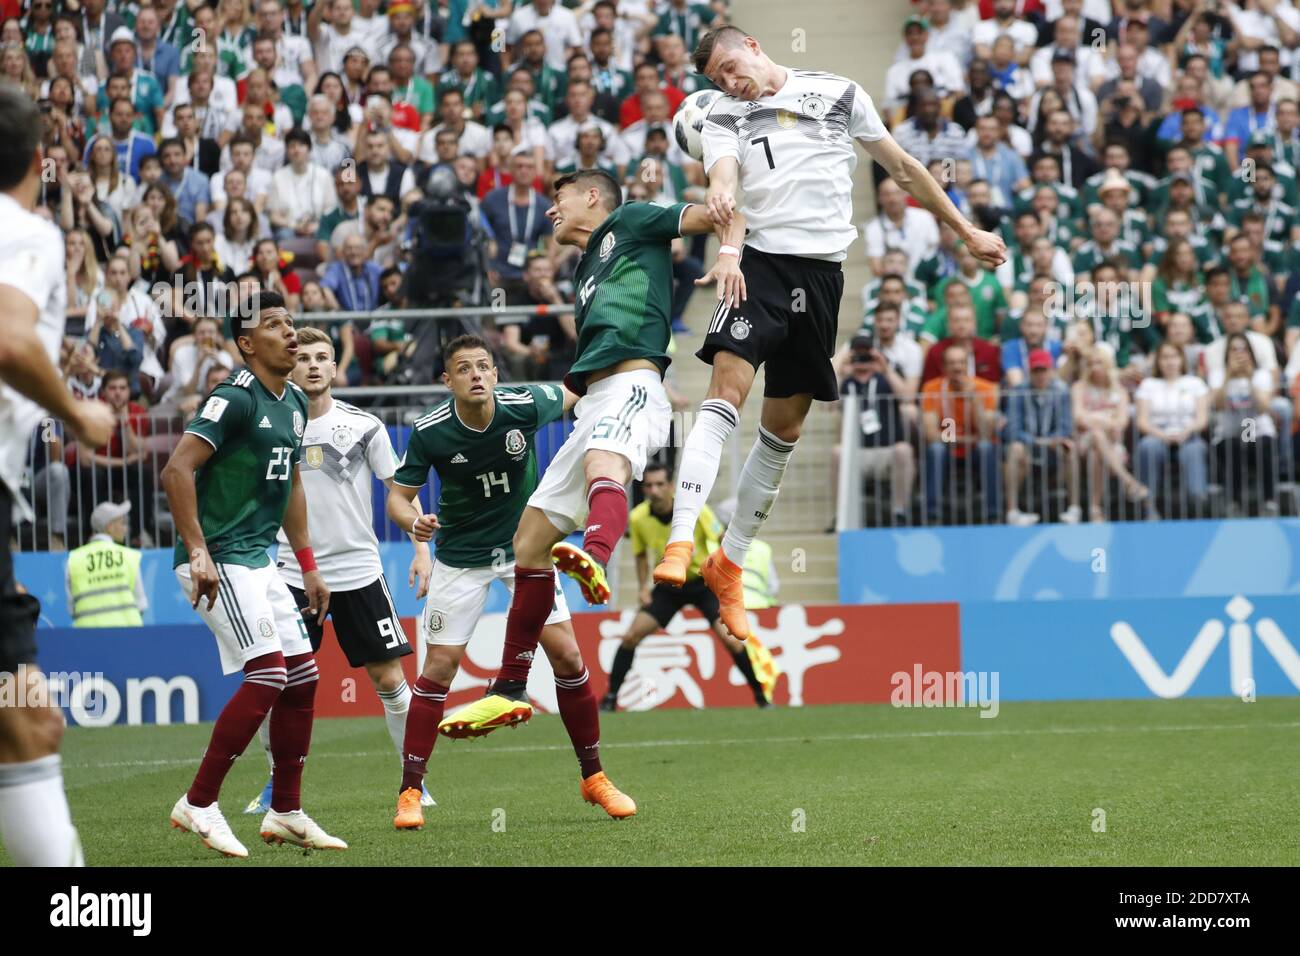 Germany's Julian Draxler battles Mexico's Hector Moreno during the 2018 FIFA World Cup Russia game, Germany vs Mexico in Luzhniky Stadium, Moscow, Russia on June 17, 2018. Mexico won 1-0. Photo by Henri Szwarc/ABACAPRESS.COM Stock Photo